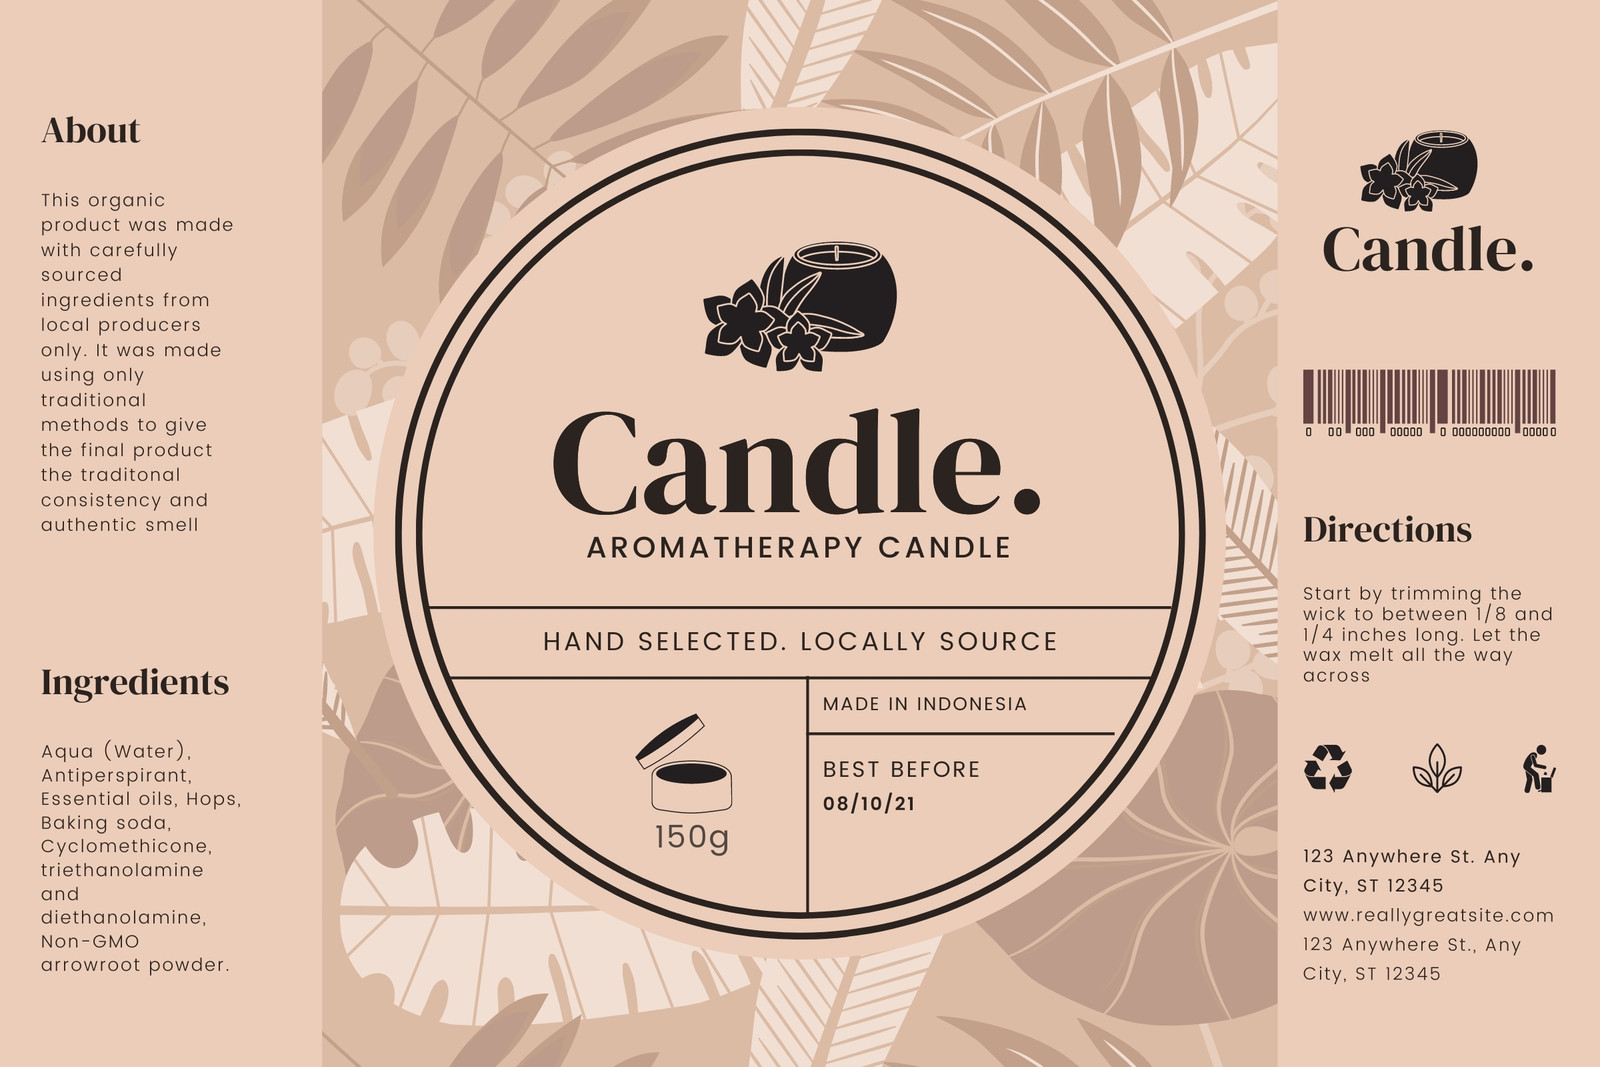 Candle Warning Label Template Editable Candle Safety Label Circle Candle  Label Canva Template Minimalist Warning Label Template 